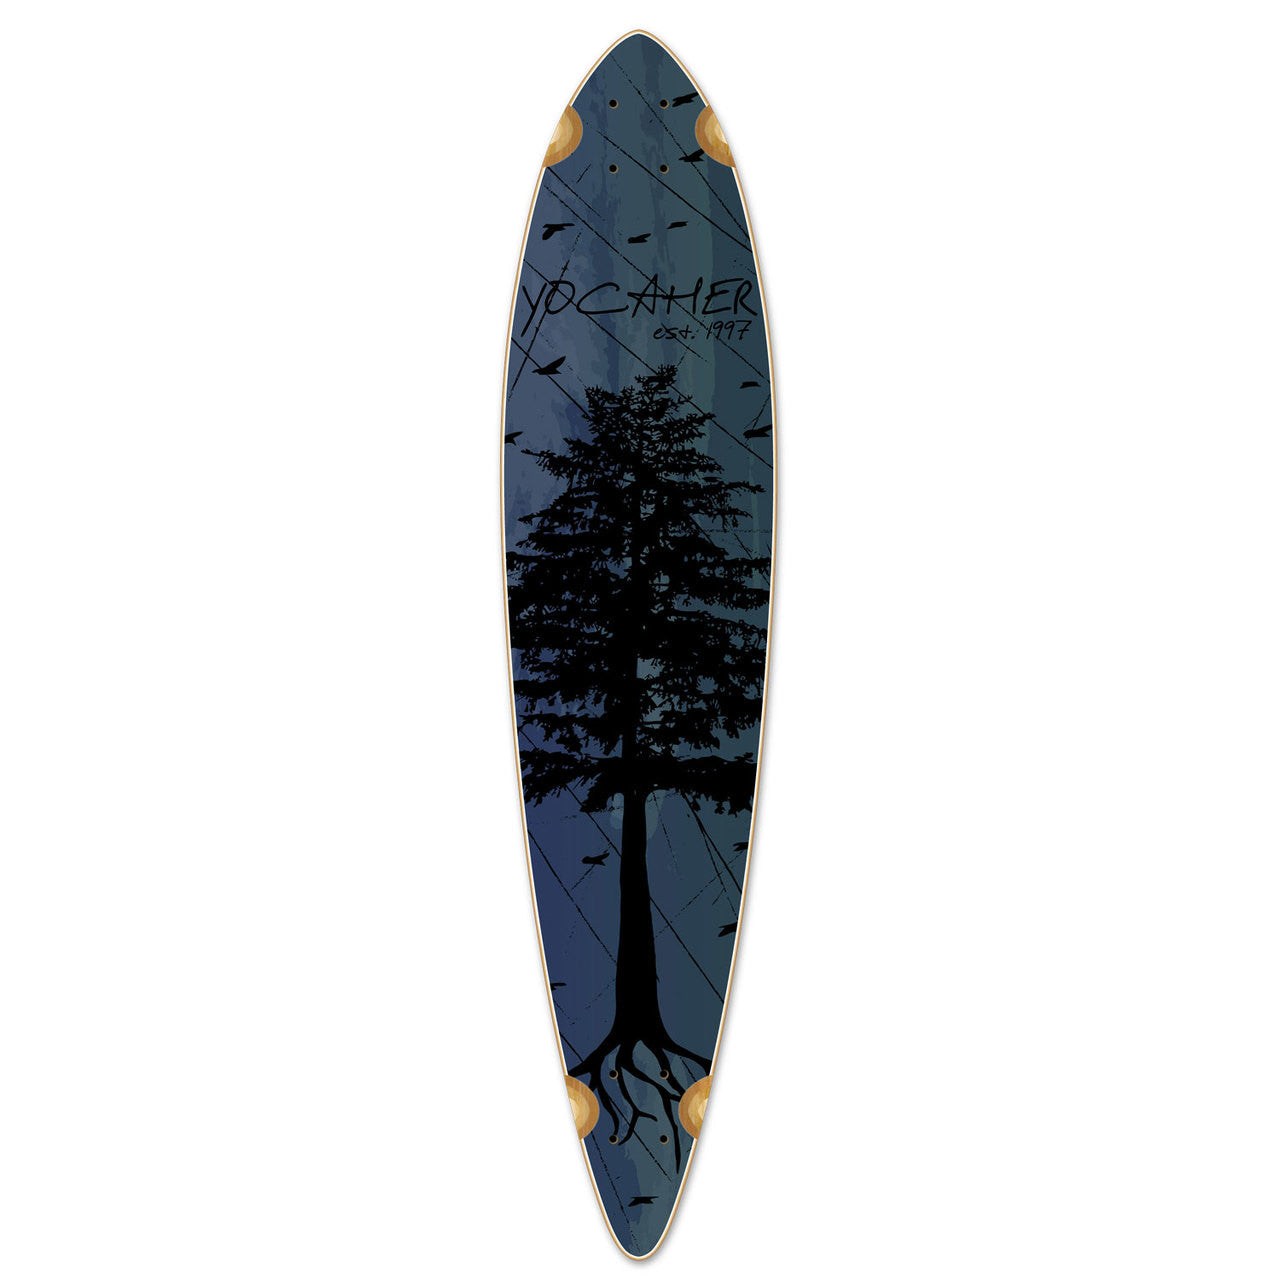 Yocaher Pintail Longboard Deck - In the Pines : Blue